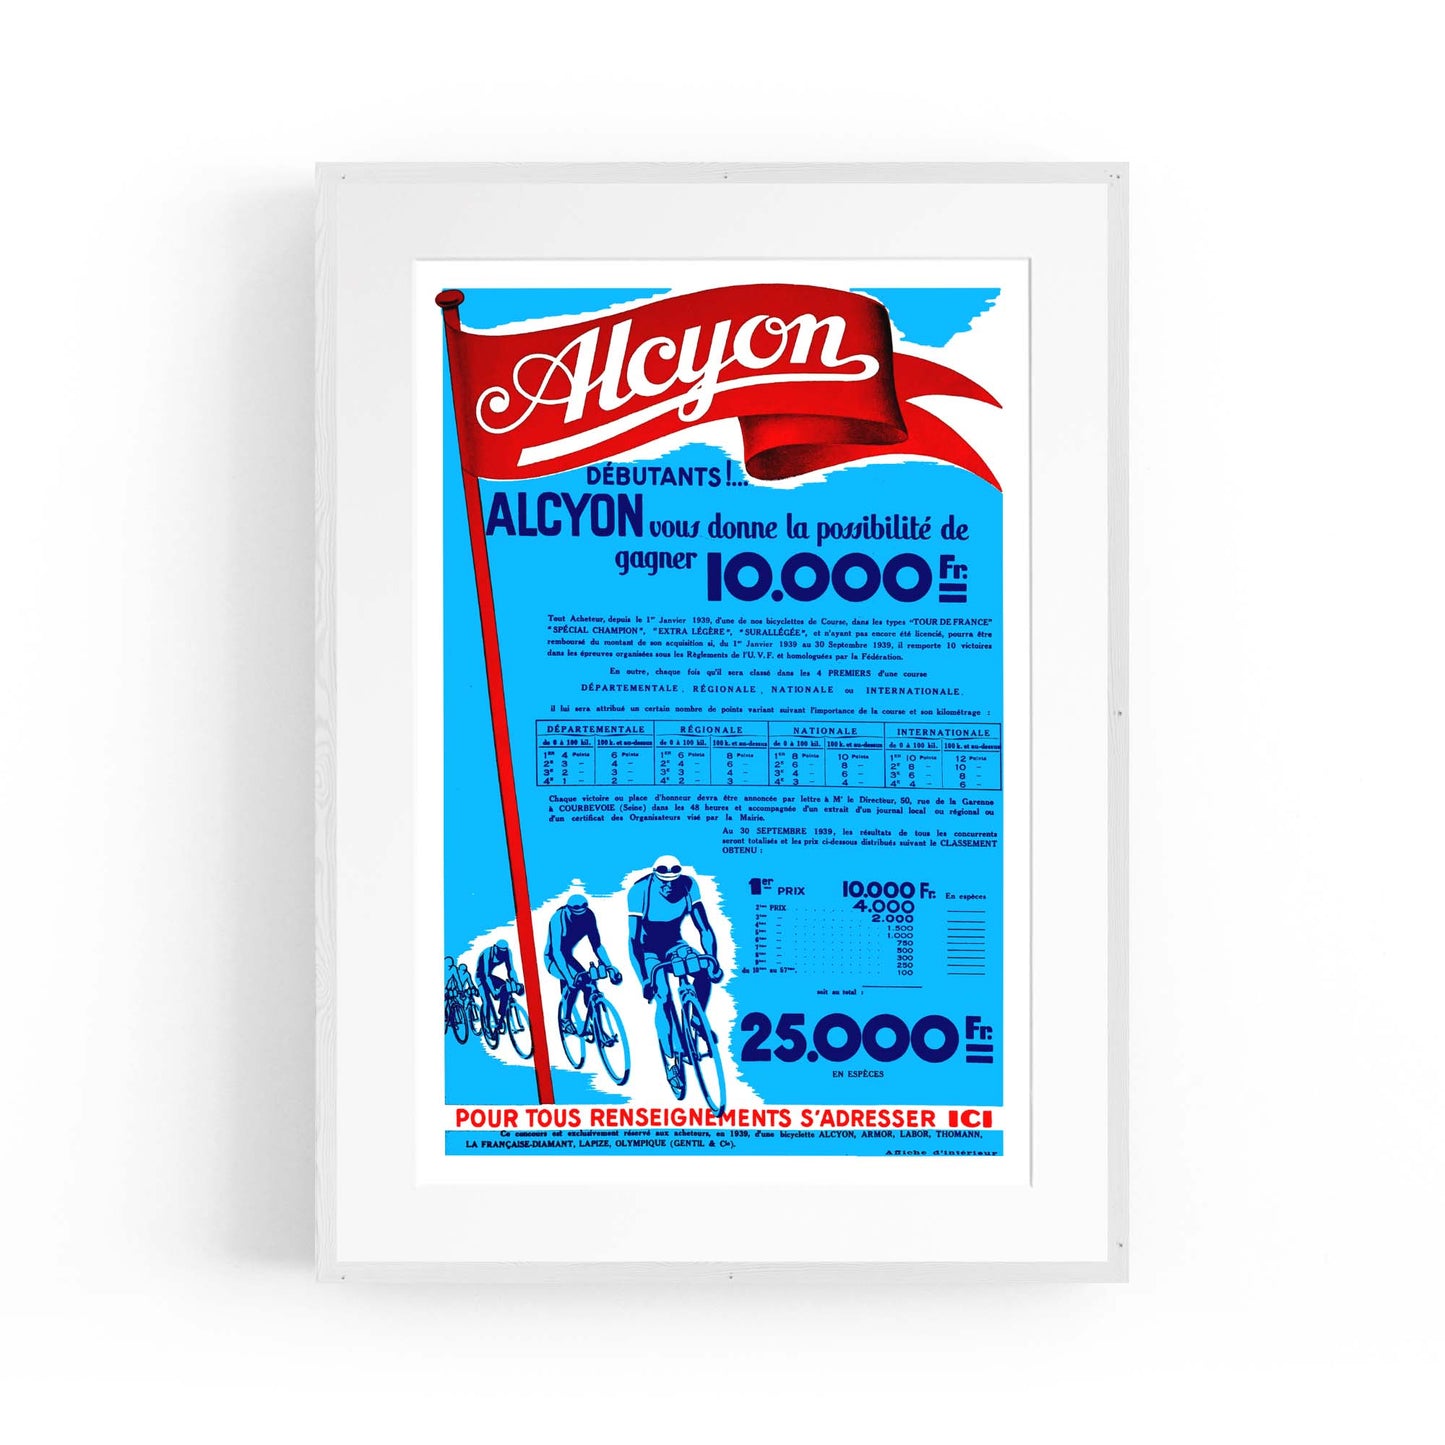 Alcyon Cycling Vintage Advert Wall Art - The Affordable Art Company